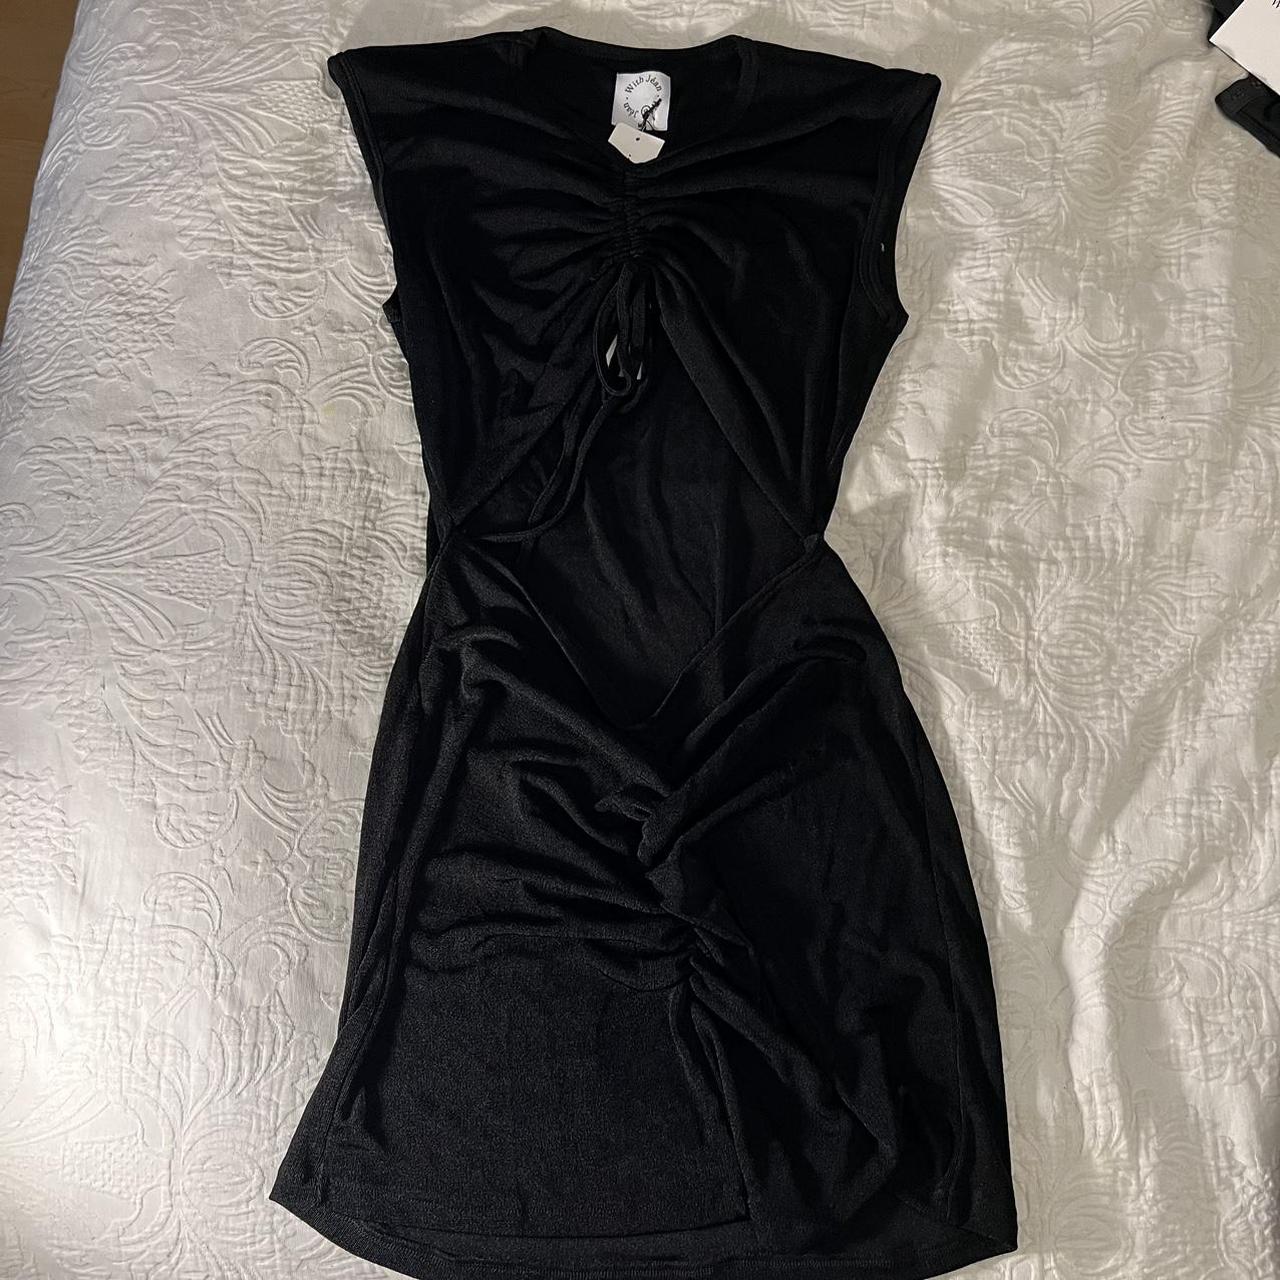 With Jean black dress - IT HAS TAGS AND NEVER BEEN... - Depop